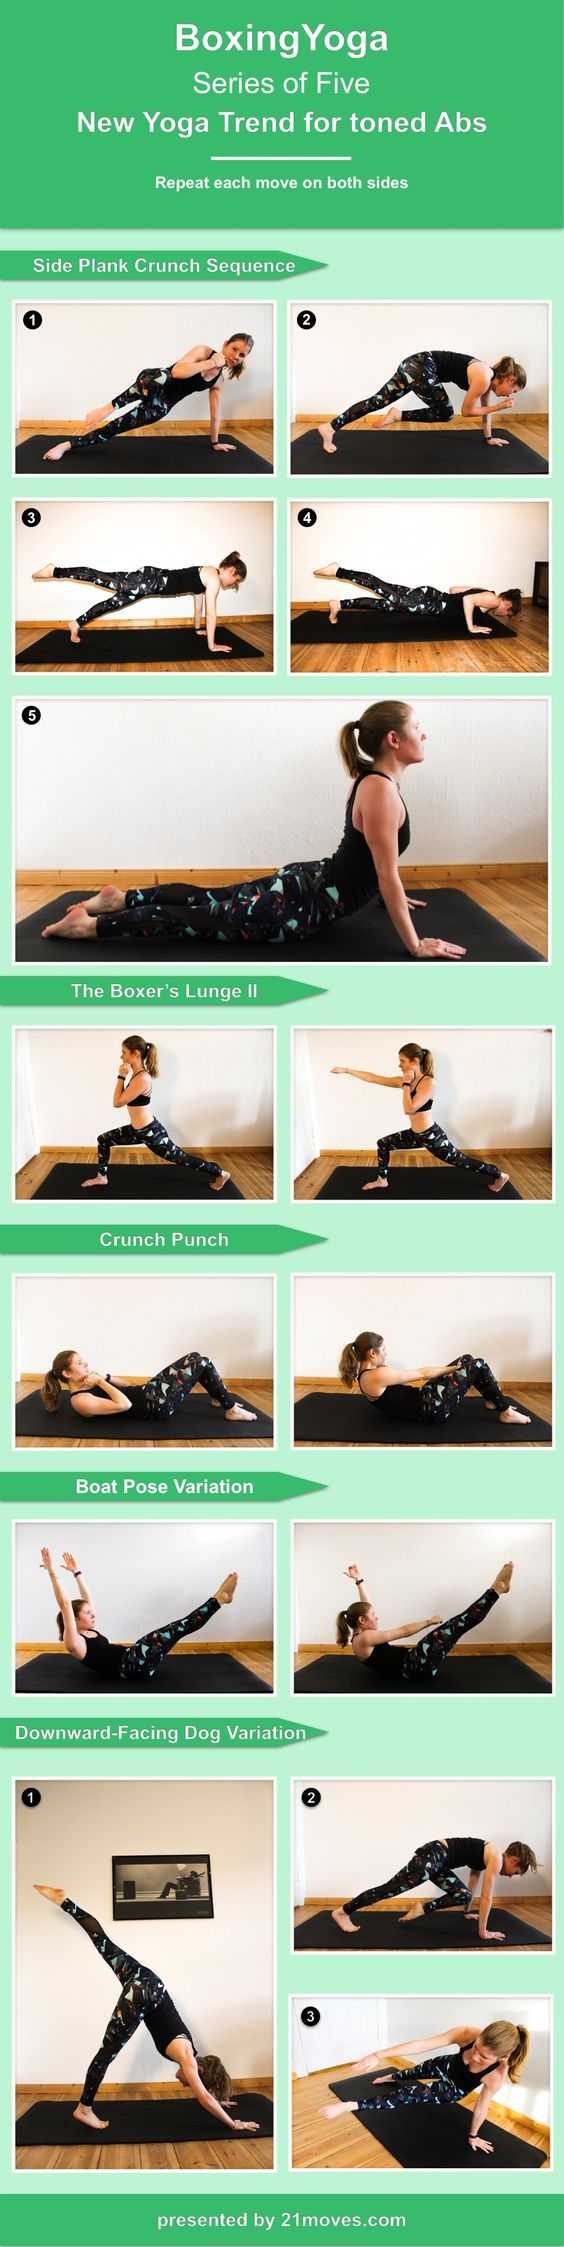 Boxingyoga: Infographic - The new Yoga Trend Series of Five for toned Abs